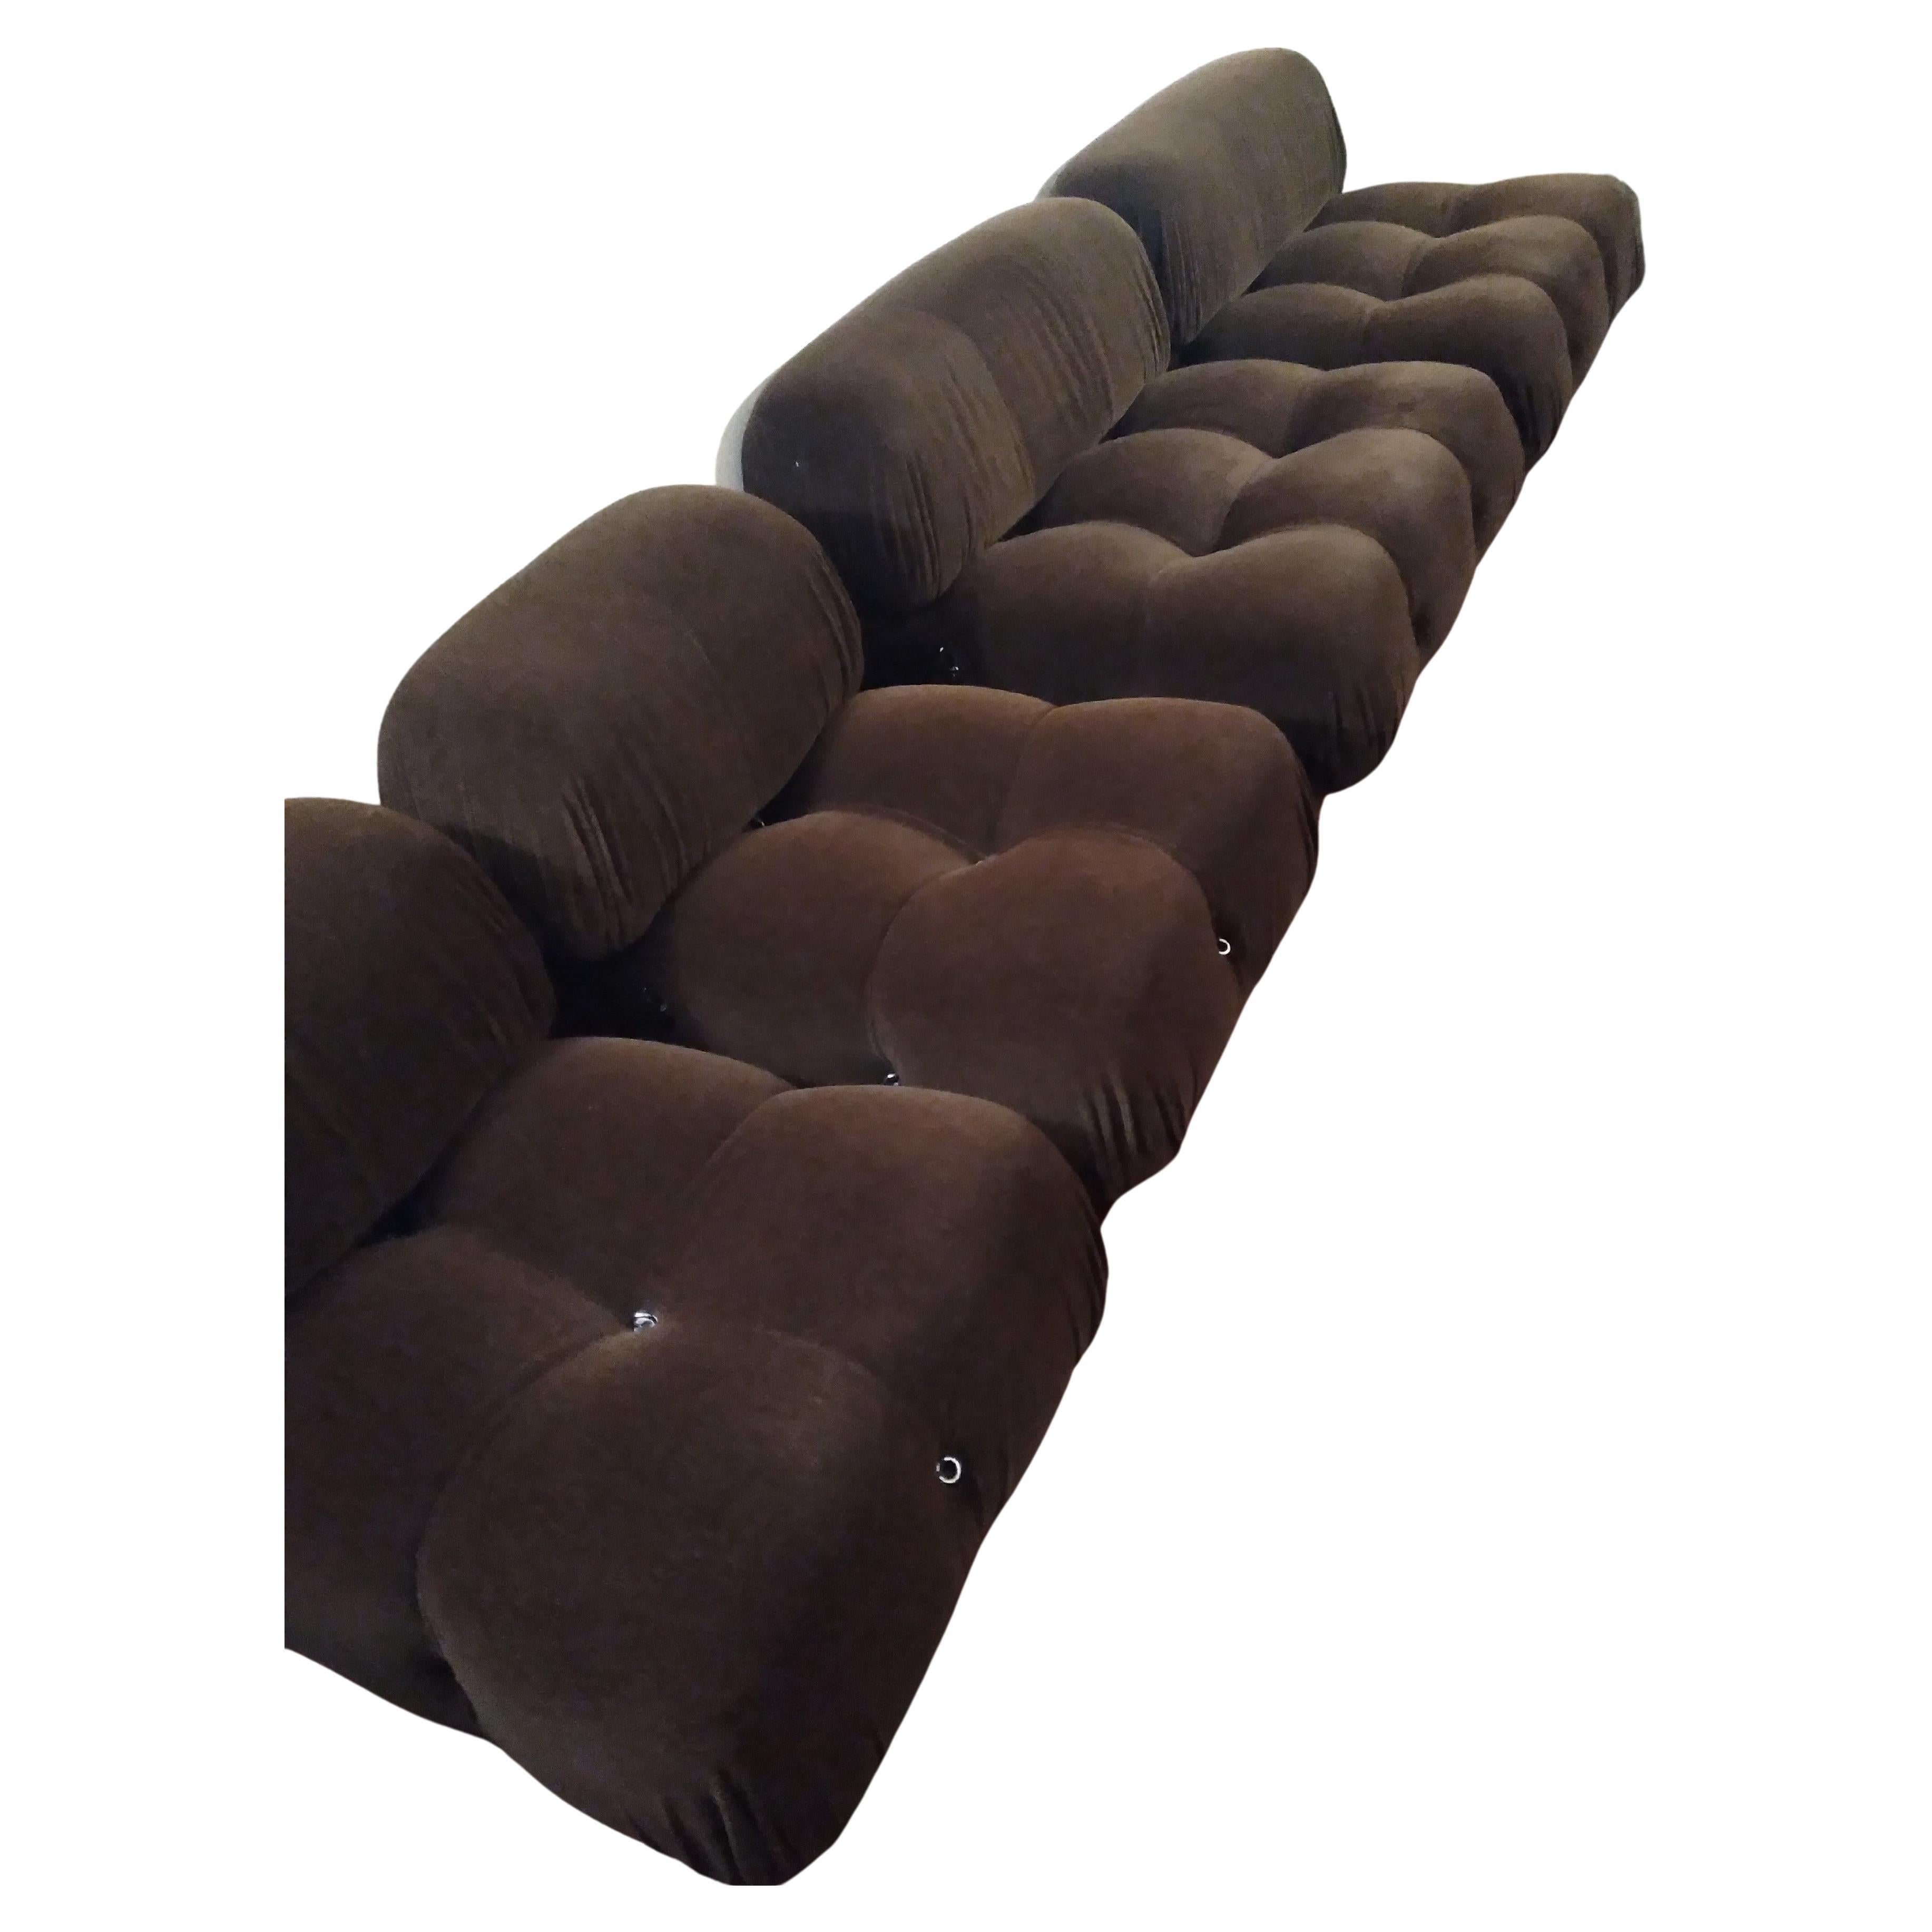 Camaleonda modular sofa design Mario Bellini B&B Italy in the 1970s, this is the first and original edition, in velvet brown in the good condition original. The seats have the brand underneath B&B This set consists of four moduluss : Two large seats